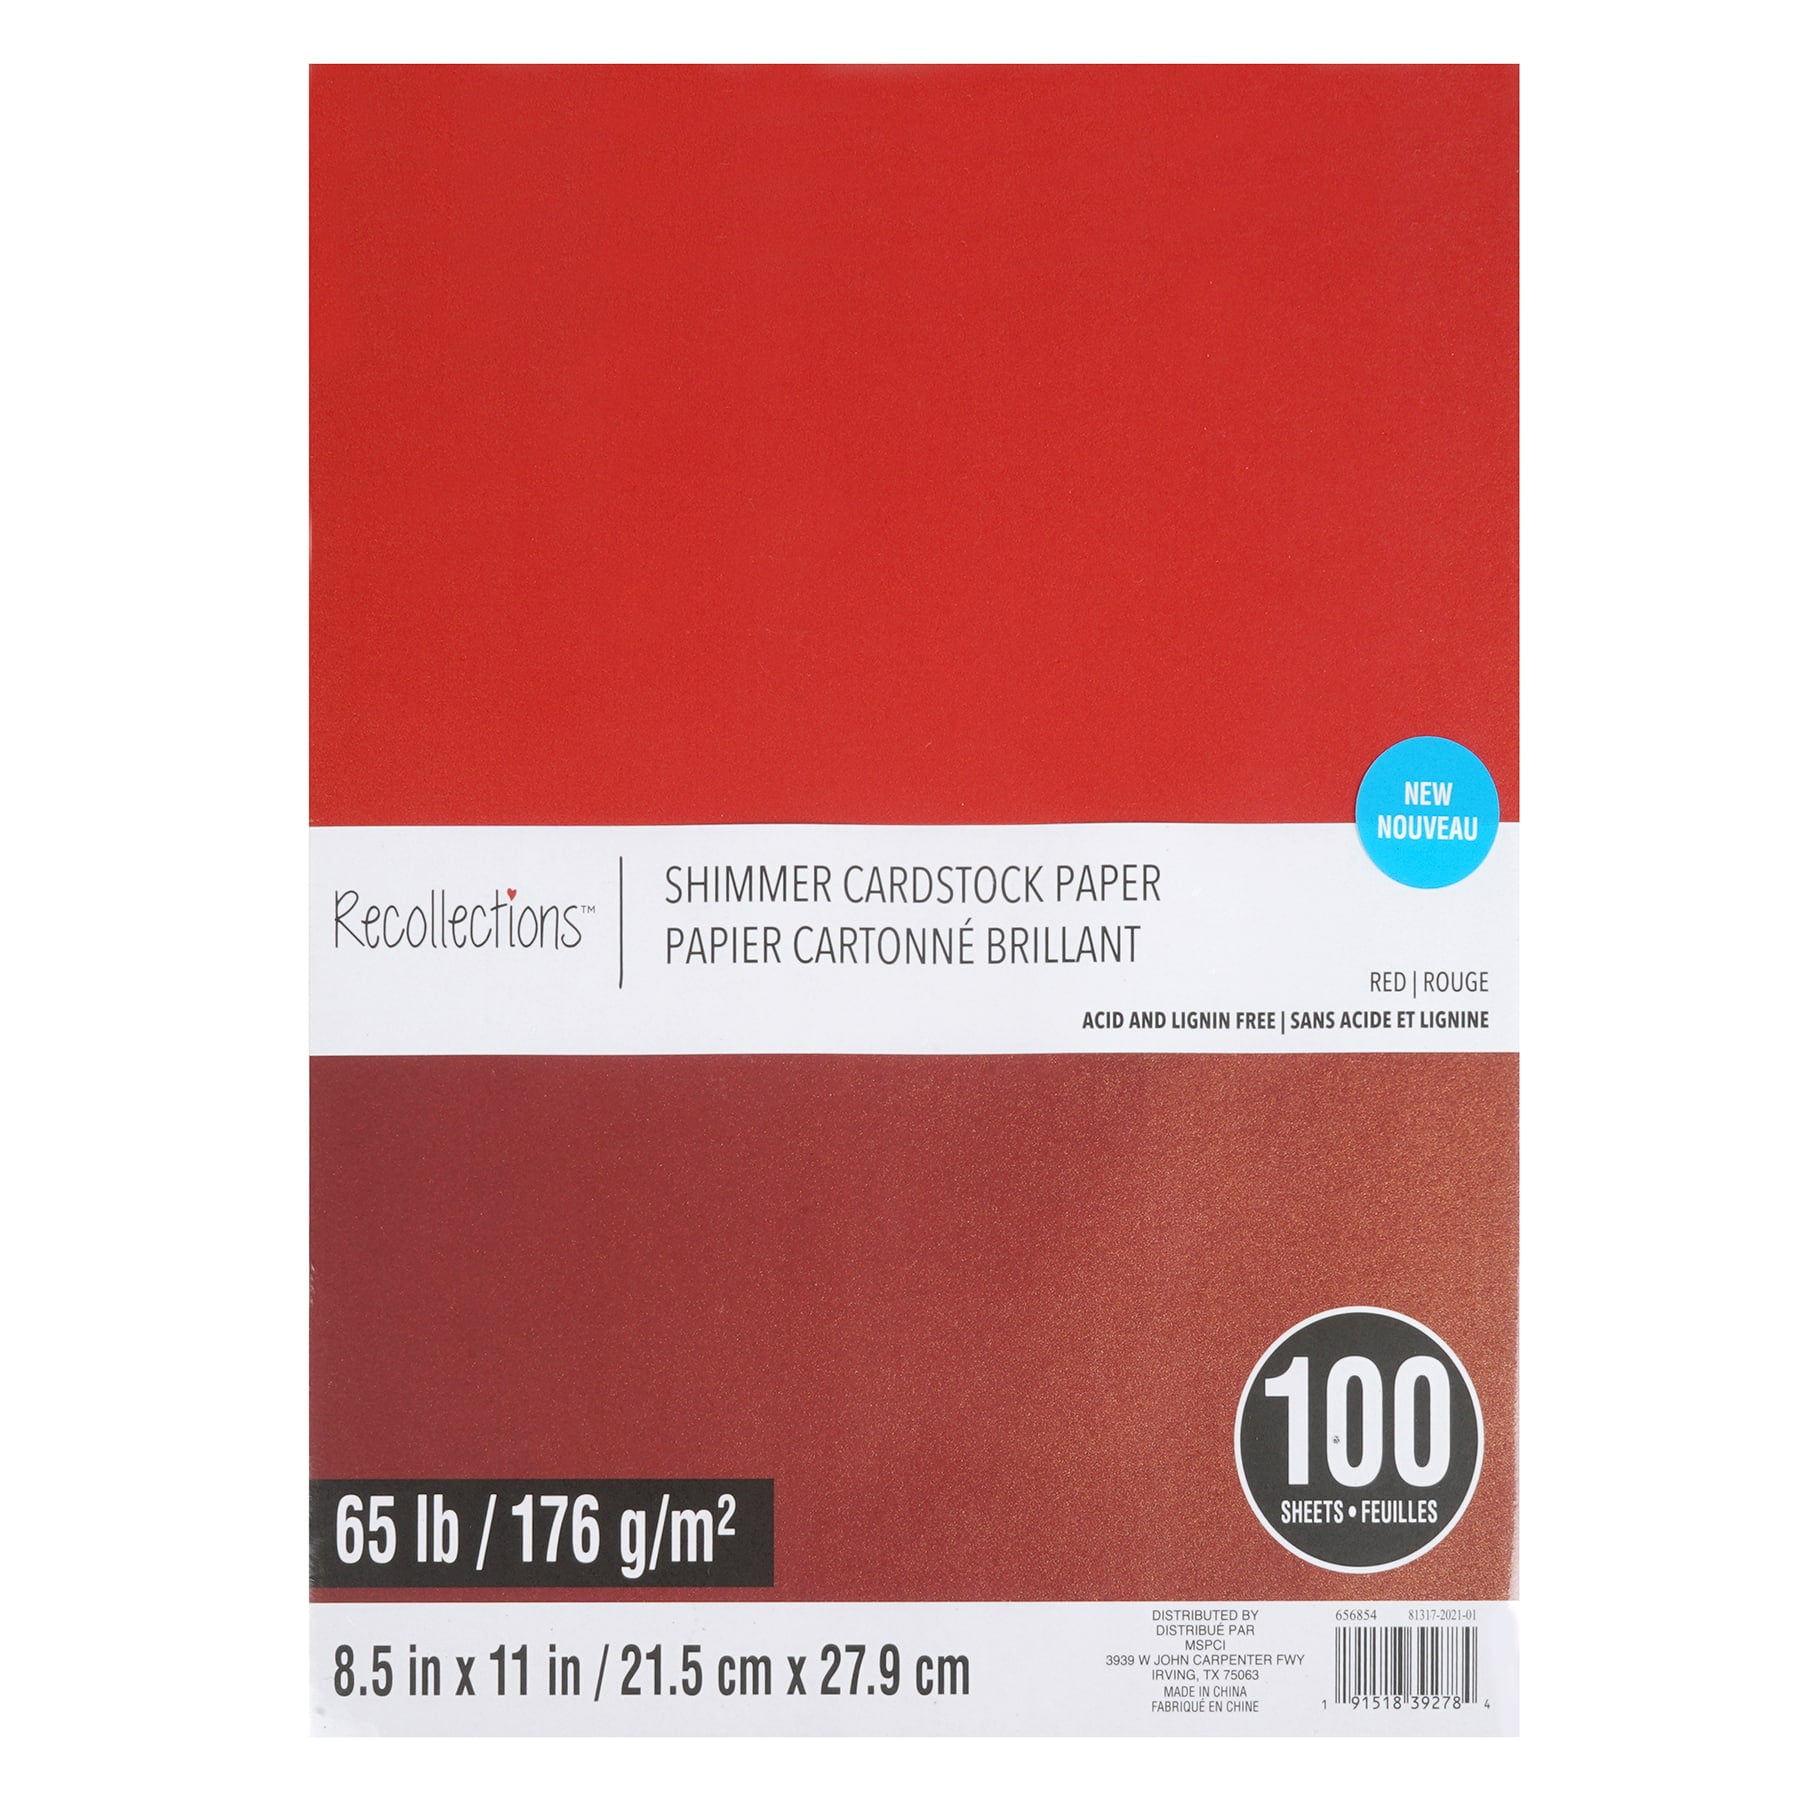 12 Packs: 50 ct. (600 total) South Beach 8.5 x 11 Cardstock Paper by  Recollections™